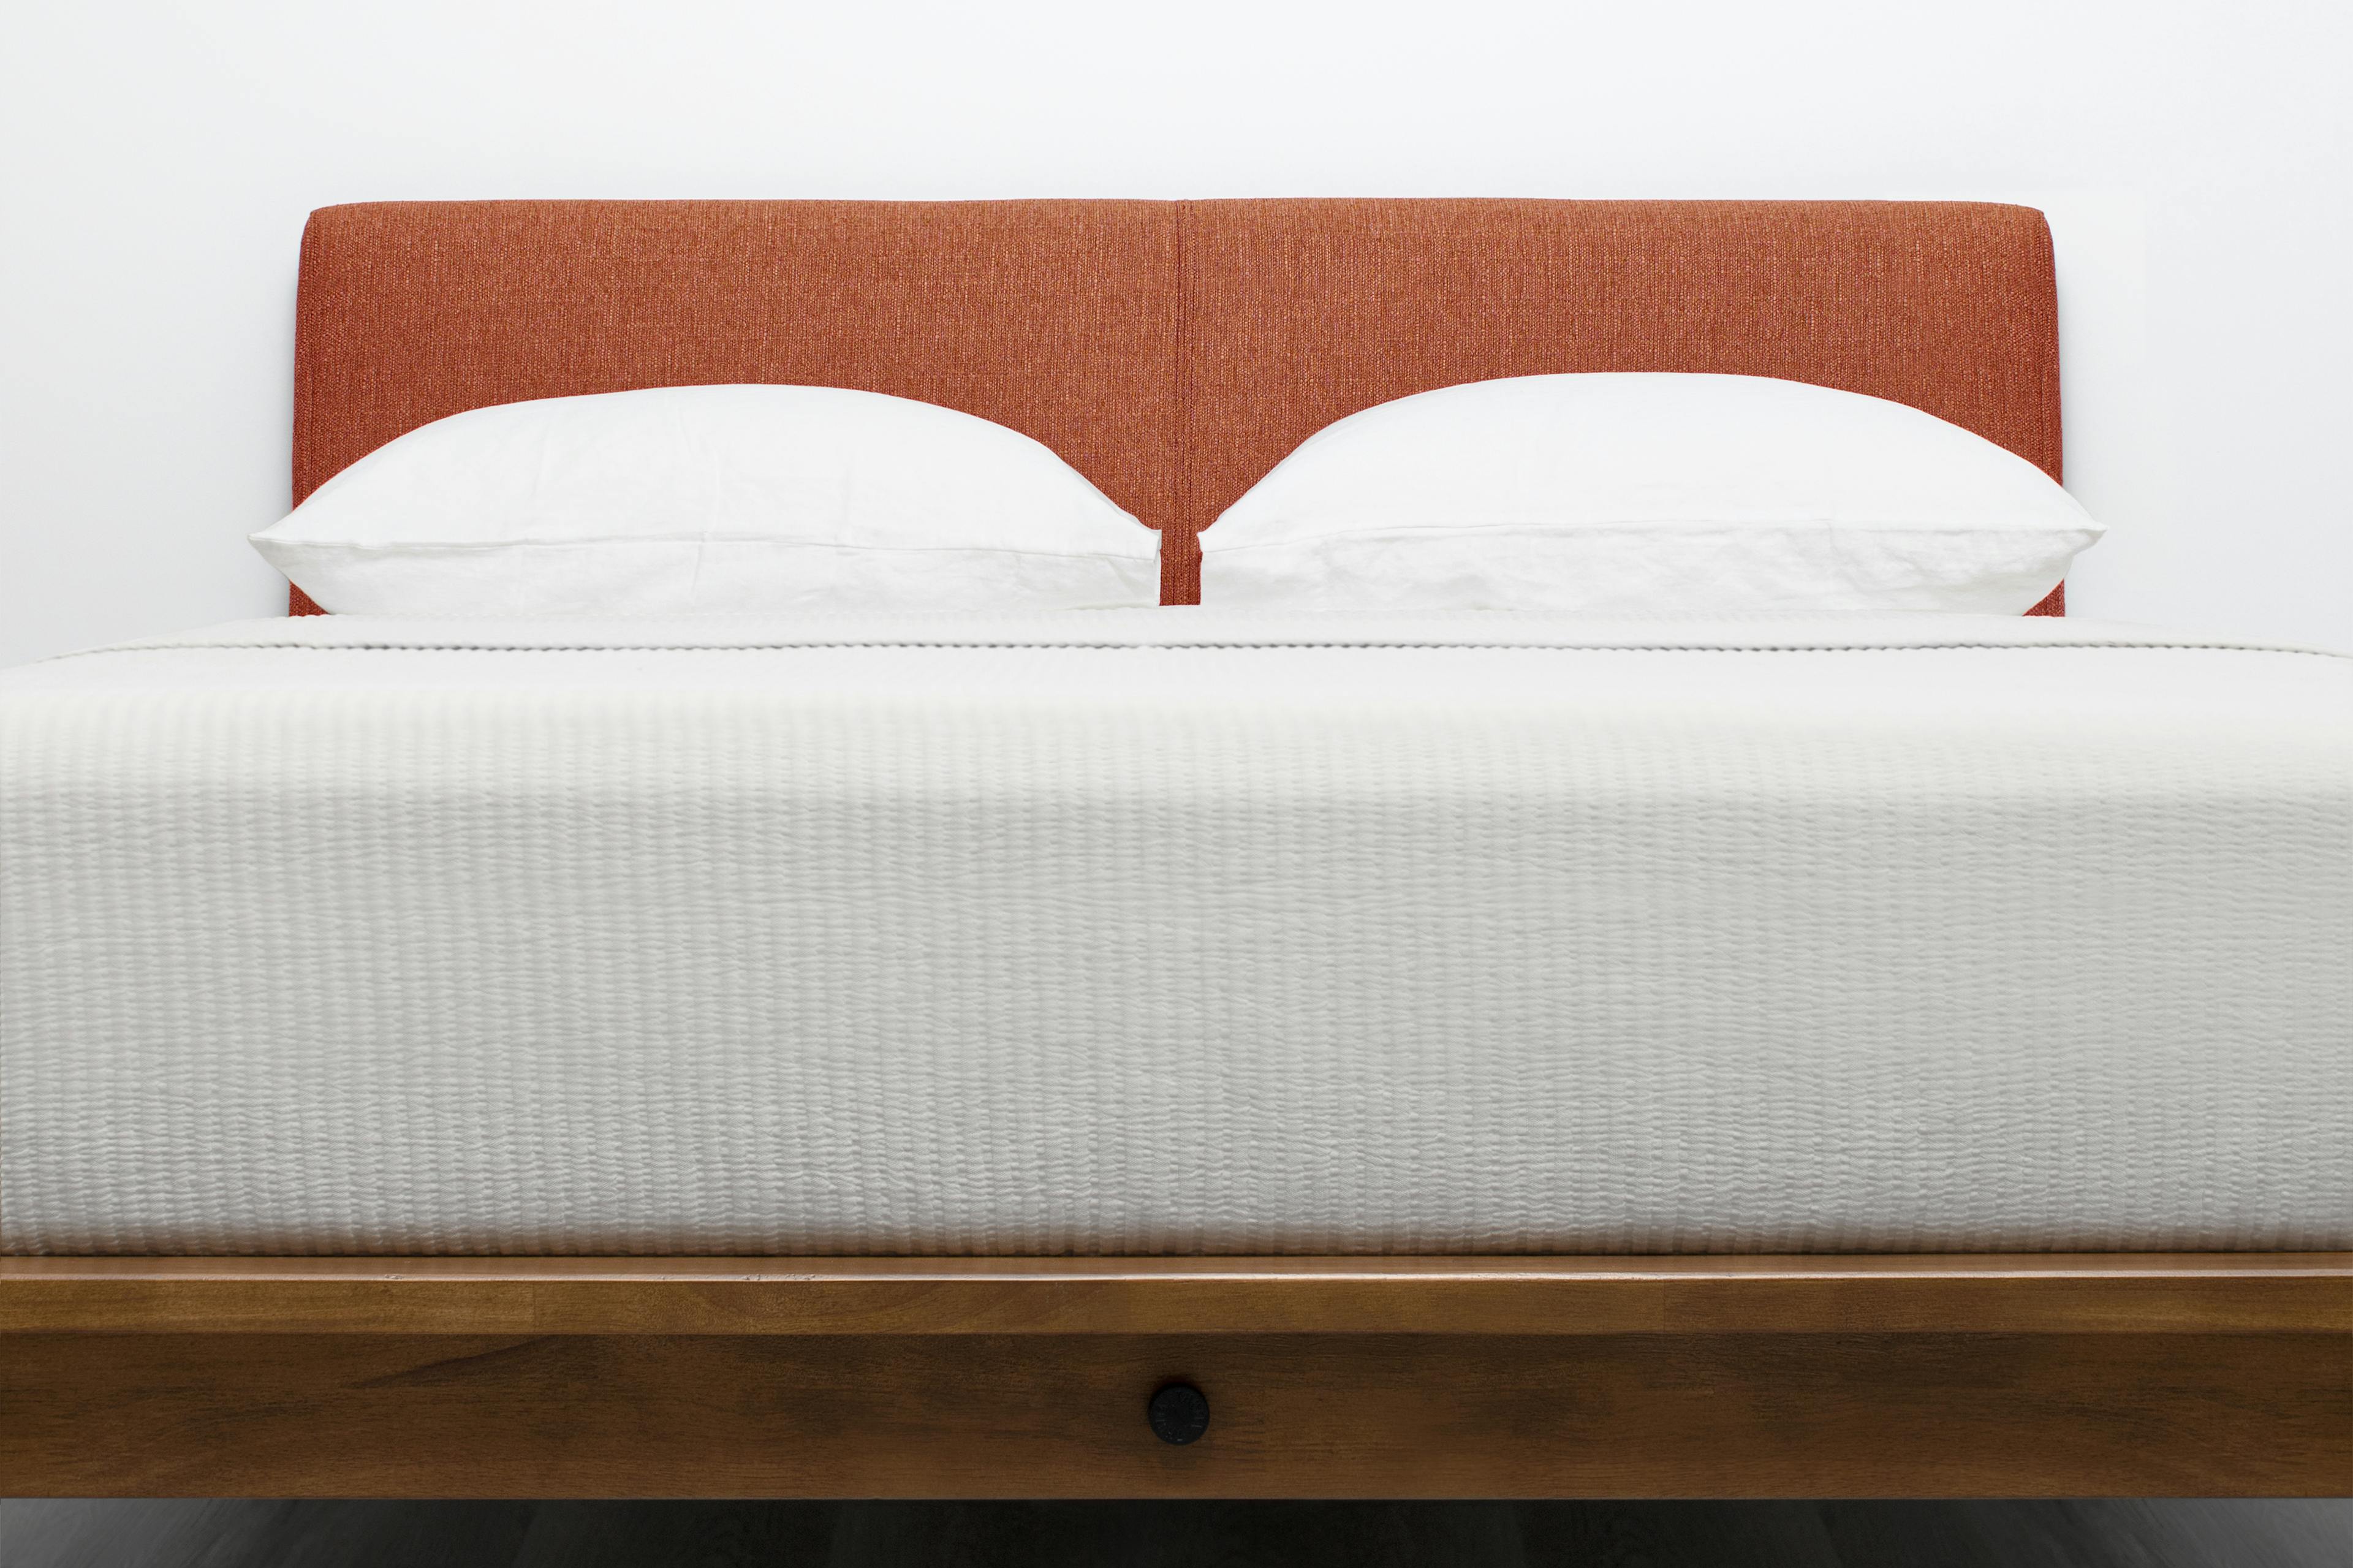 The Bed with Terracotta Pillowboard Cover in Linen Weave